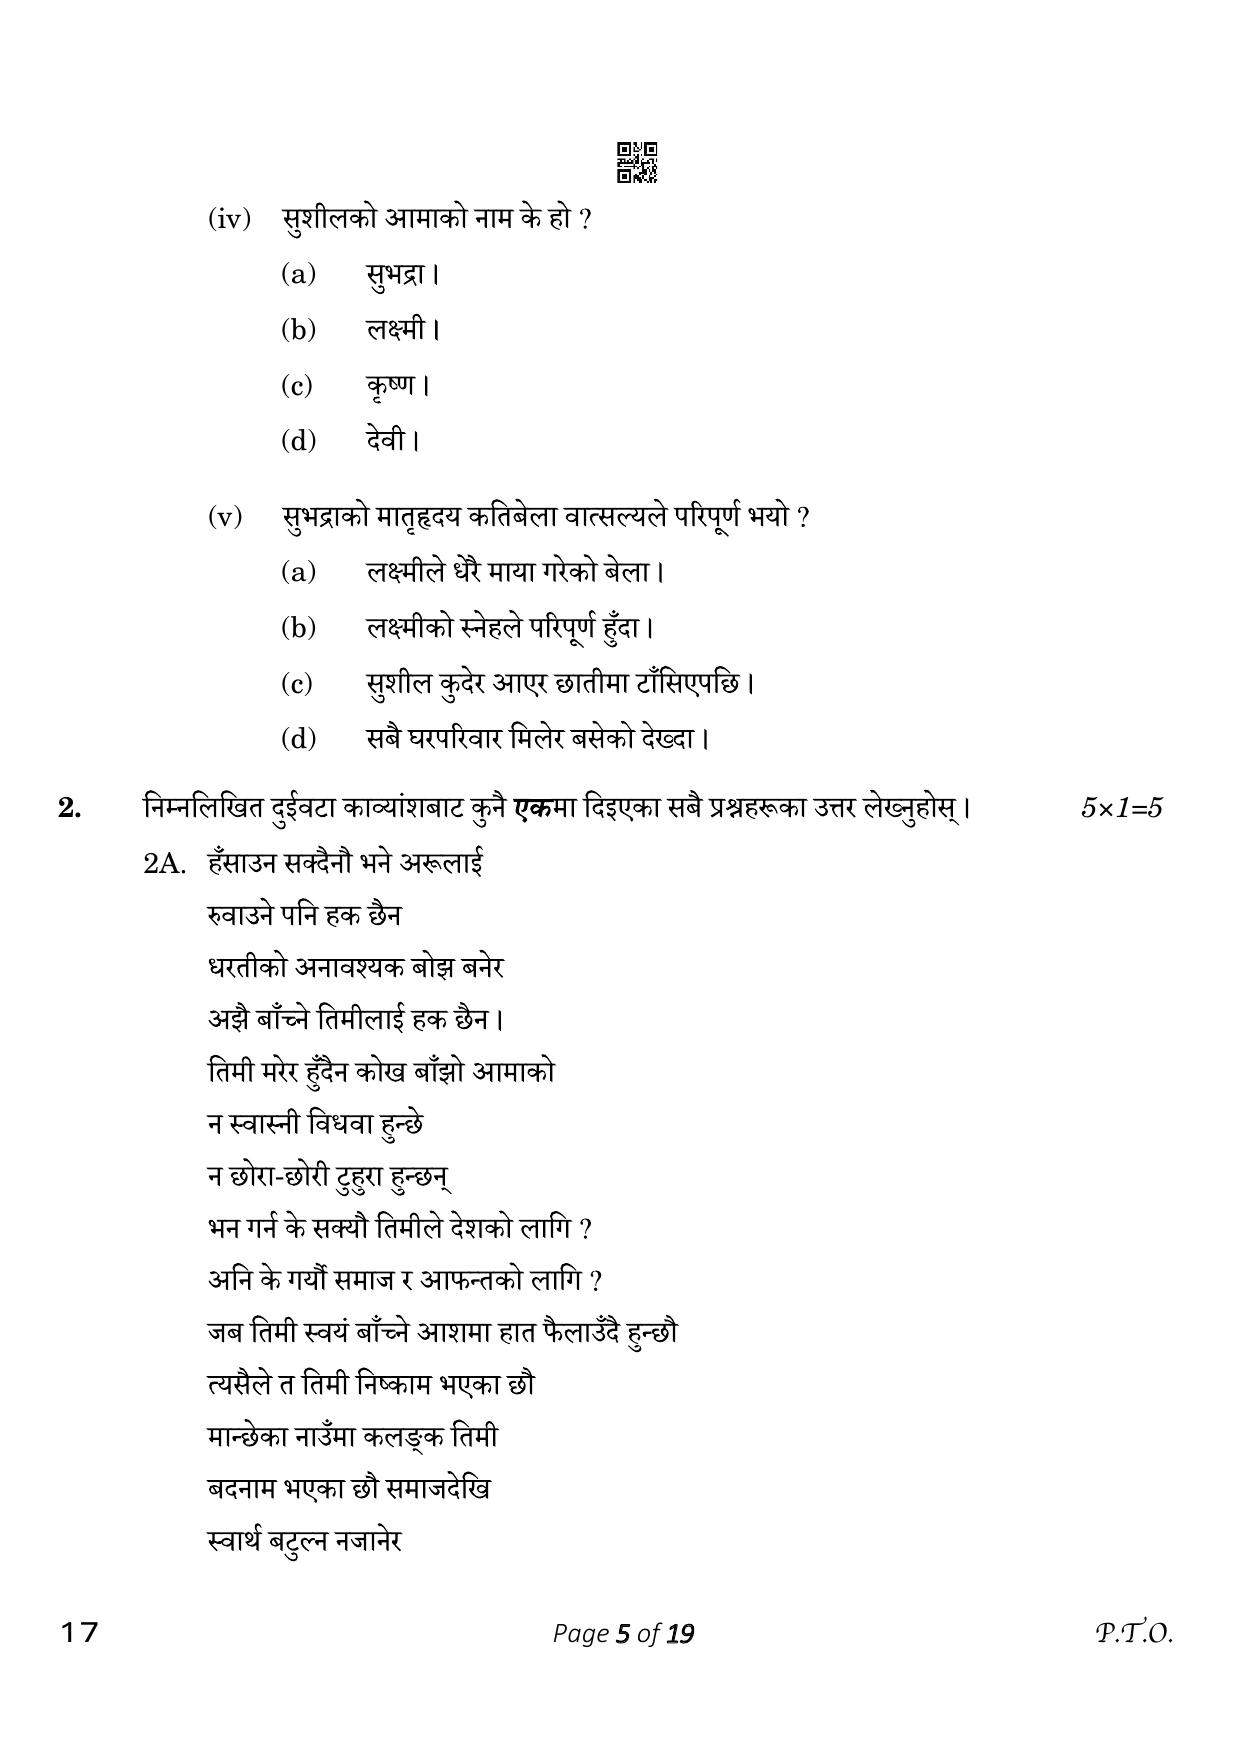 CBSE Class 10 Nepali (Compartment) 2023 Question Paper - Page 5